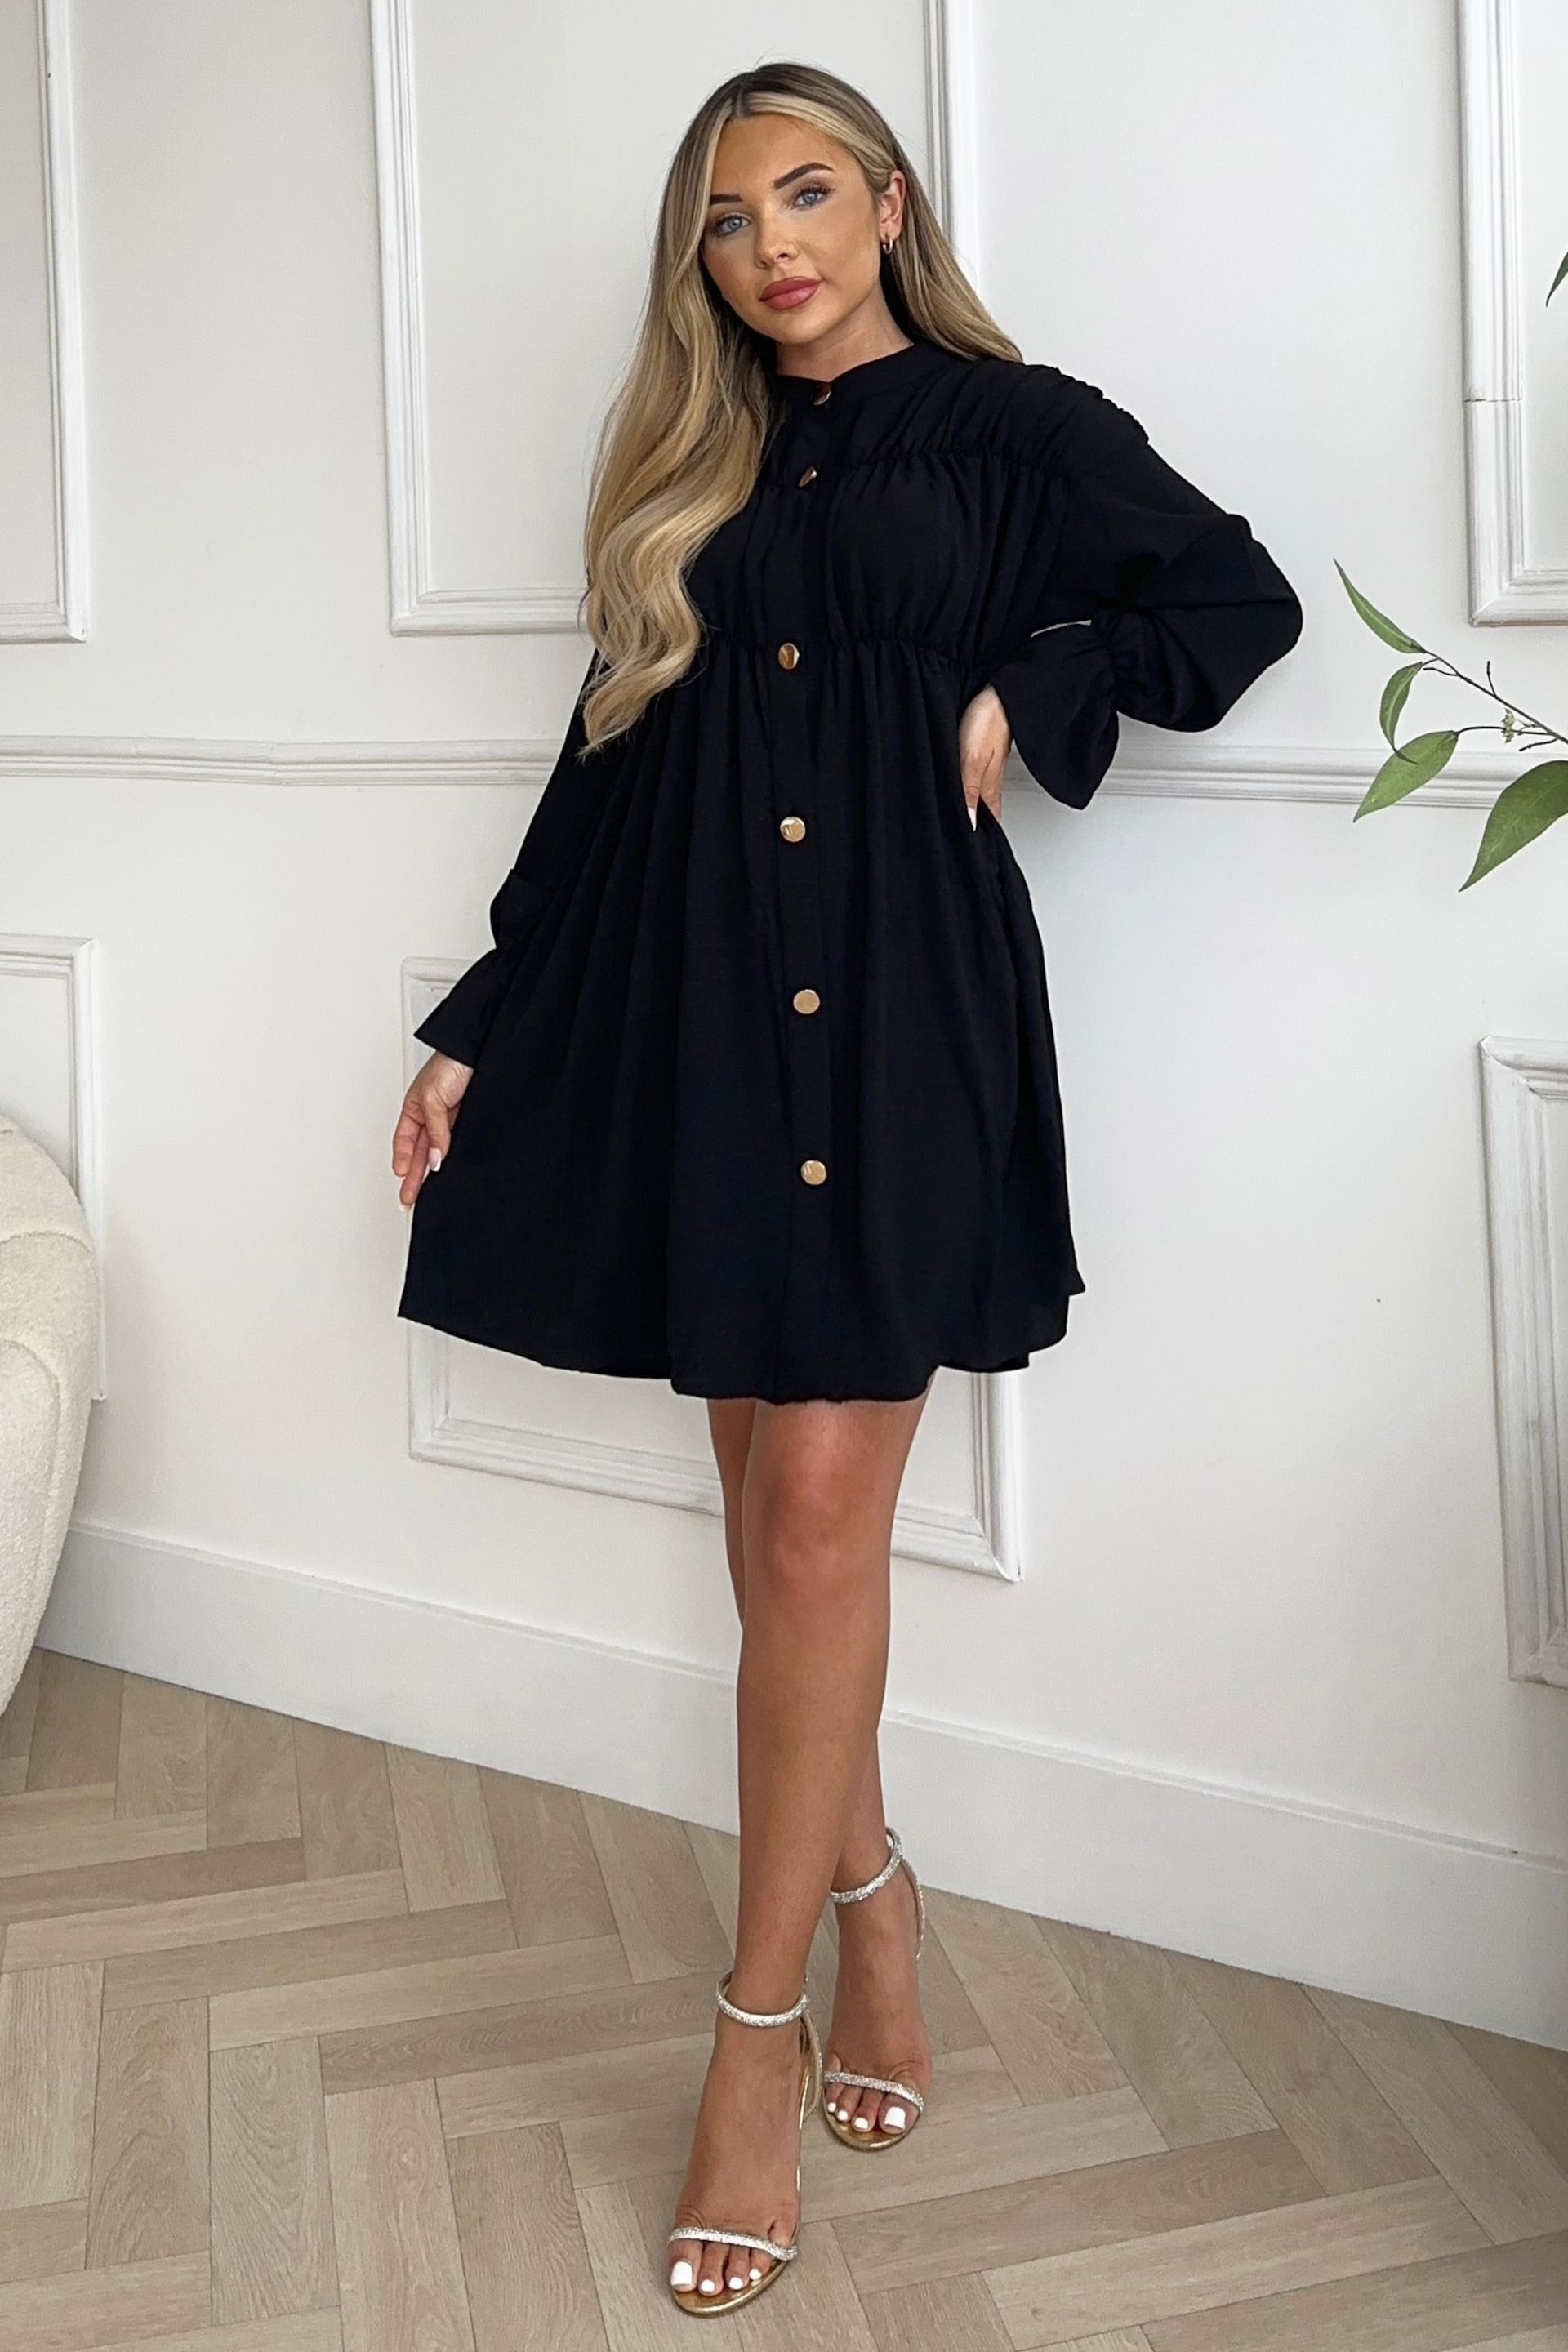 AX Paris Long Sleeve Gathered Detail Button Front Black Dress - Image 1 of 4